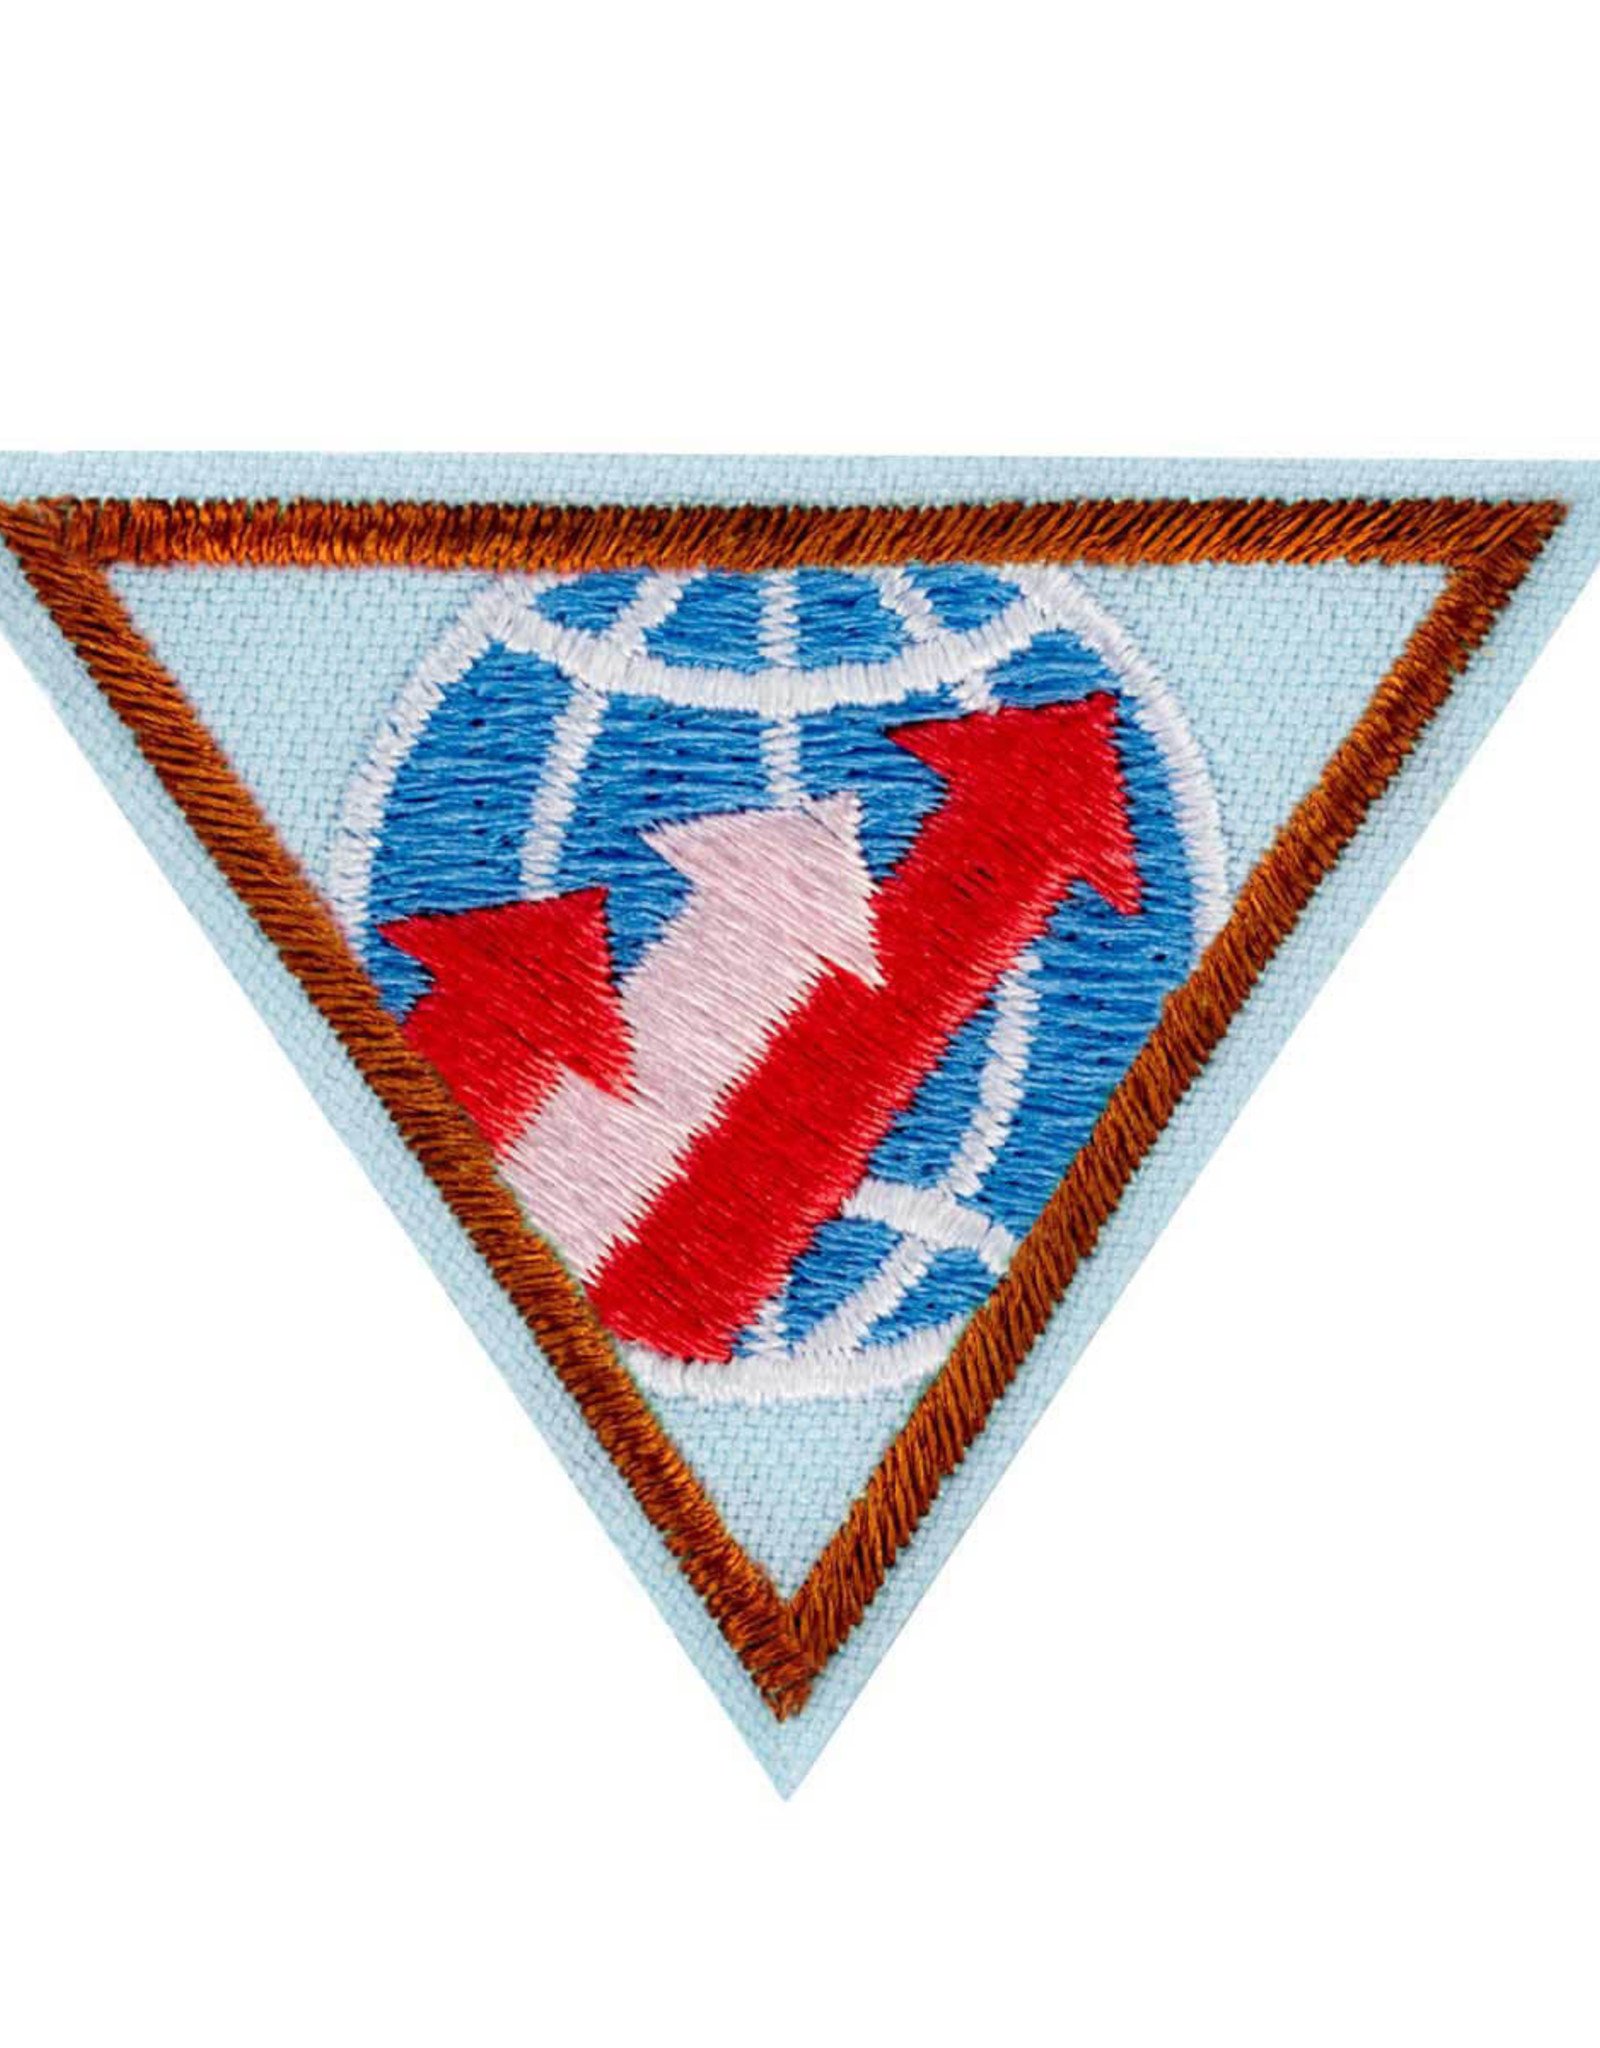 GIRL SCOUTS OF THE USA Brownie Global Action Award Year 1  Badge